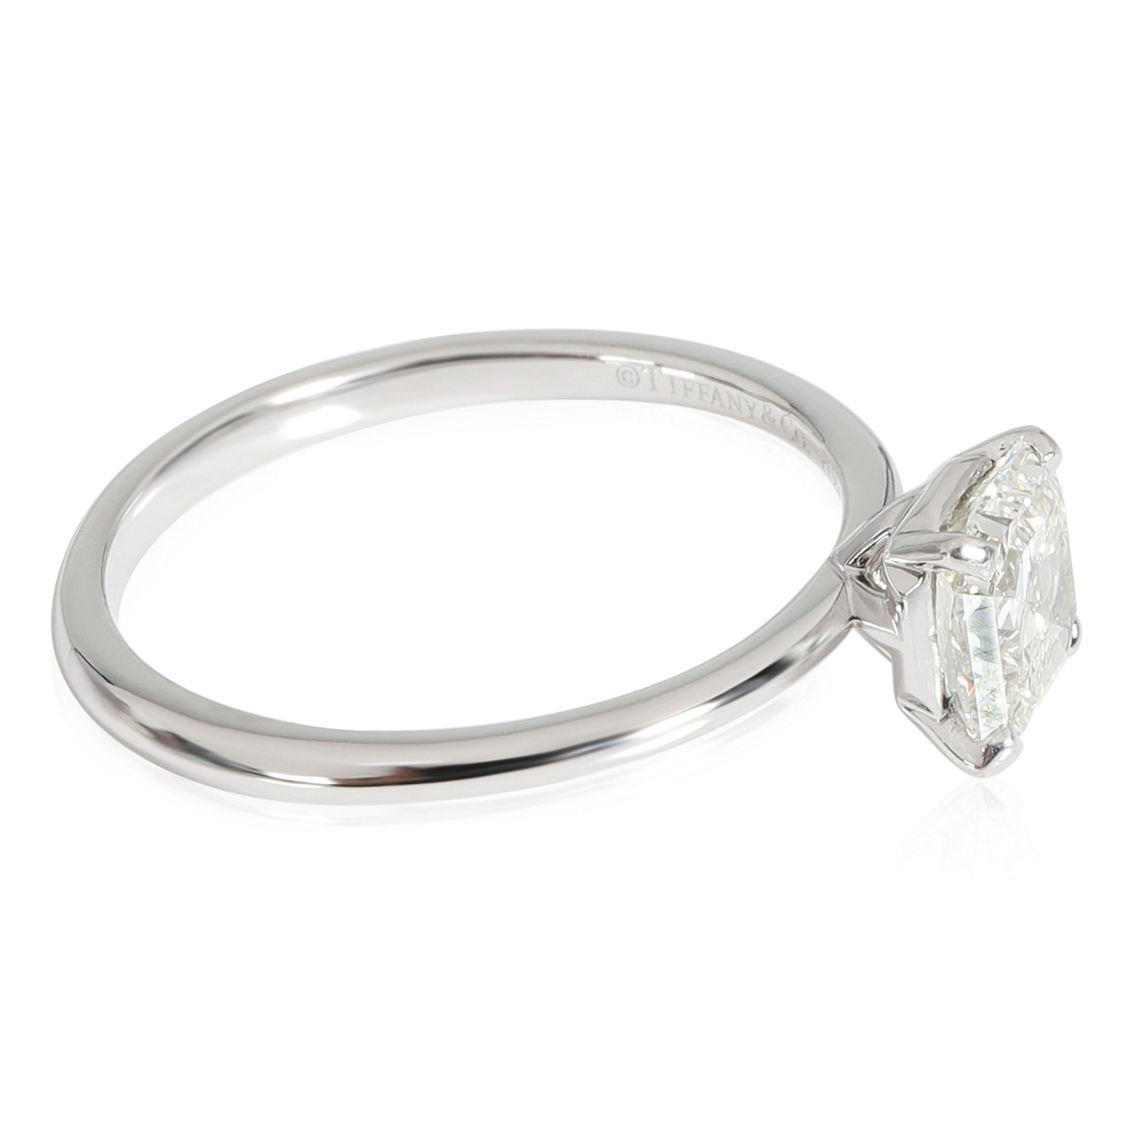 Tiffany & Co. True Solitaire Ring Pre-Owned - Image 2 of 3